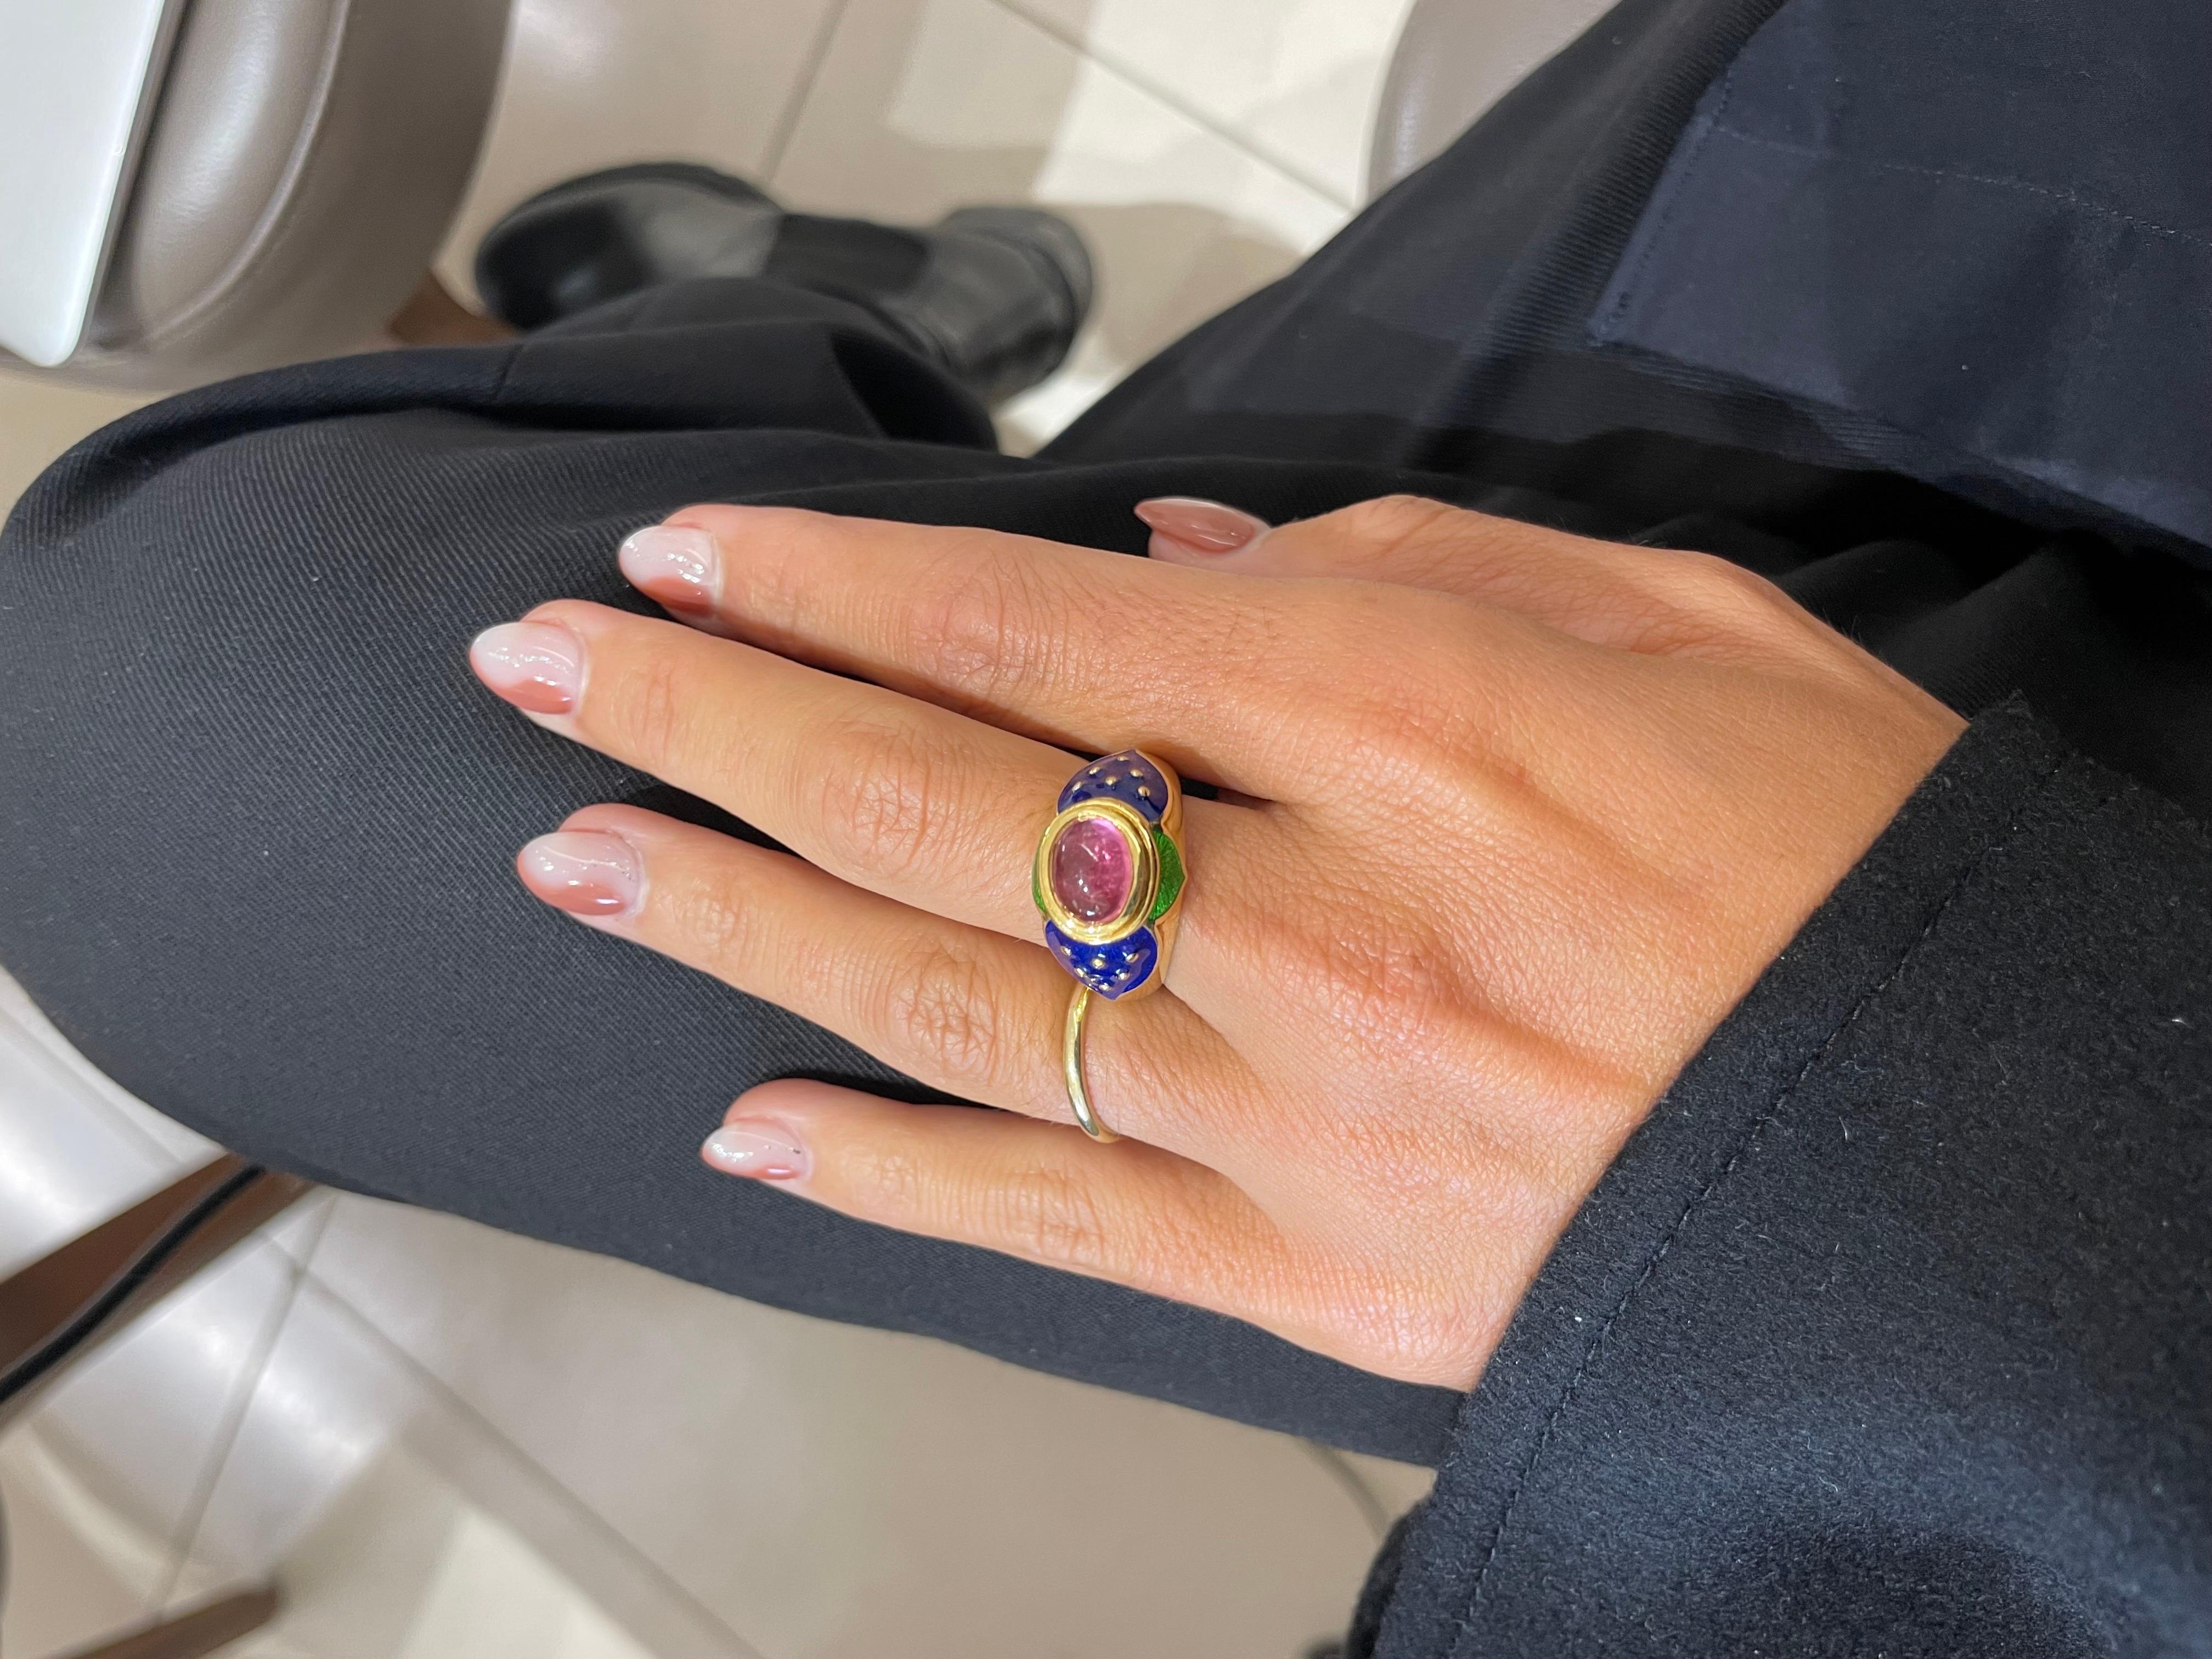 Lovely 18 karat yellow gold ring designed with the intention of a flower. The ring centers an oval cabochon pink tourmaline set horizontally. Green and blue enamel accent the center stone.
Ring size 7.5
Stamped Cellini 750